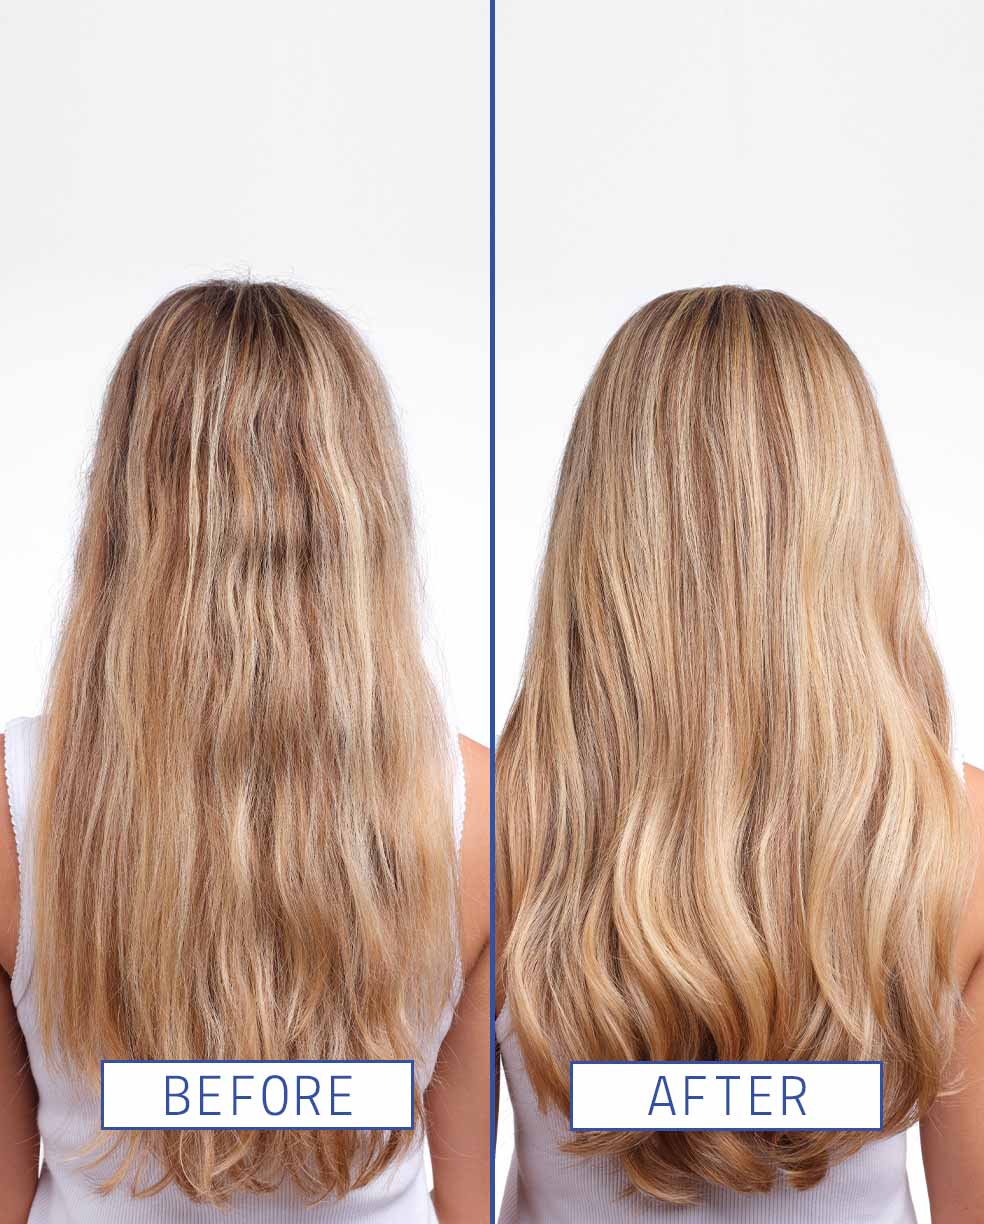 AAVRANI Intensive Repair Conditioning Hair Mask before and after on blonde hair